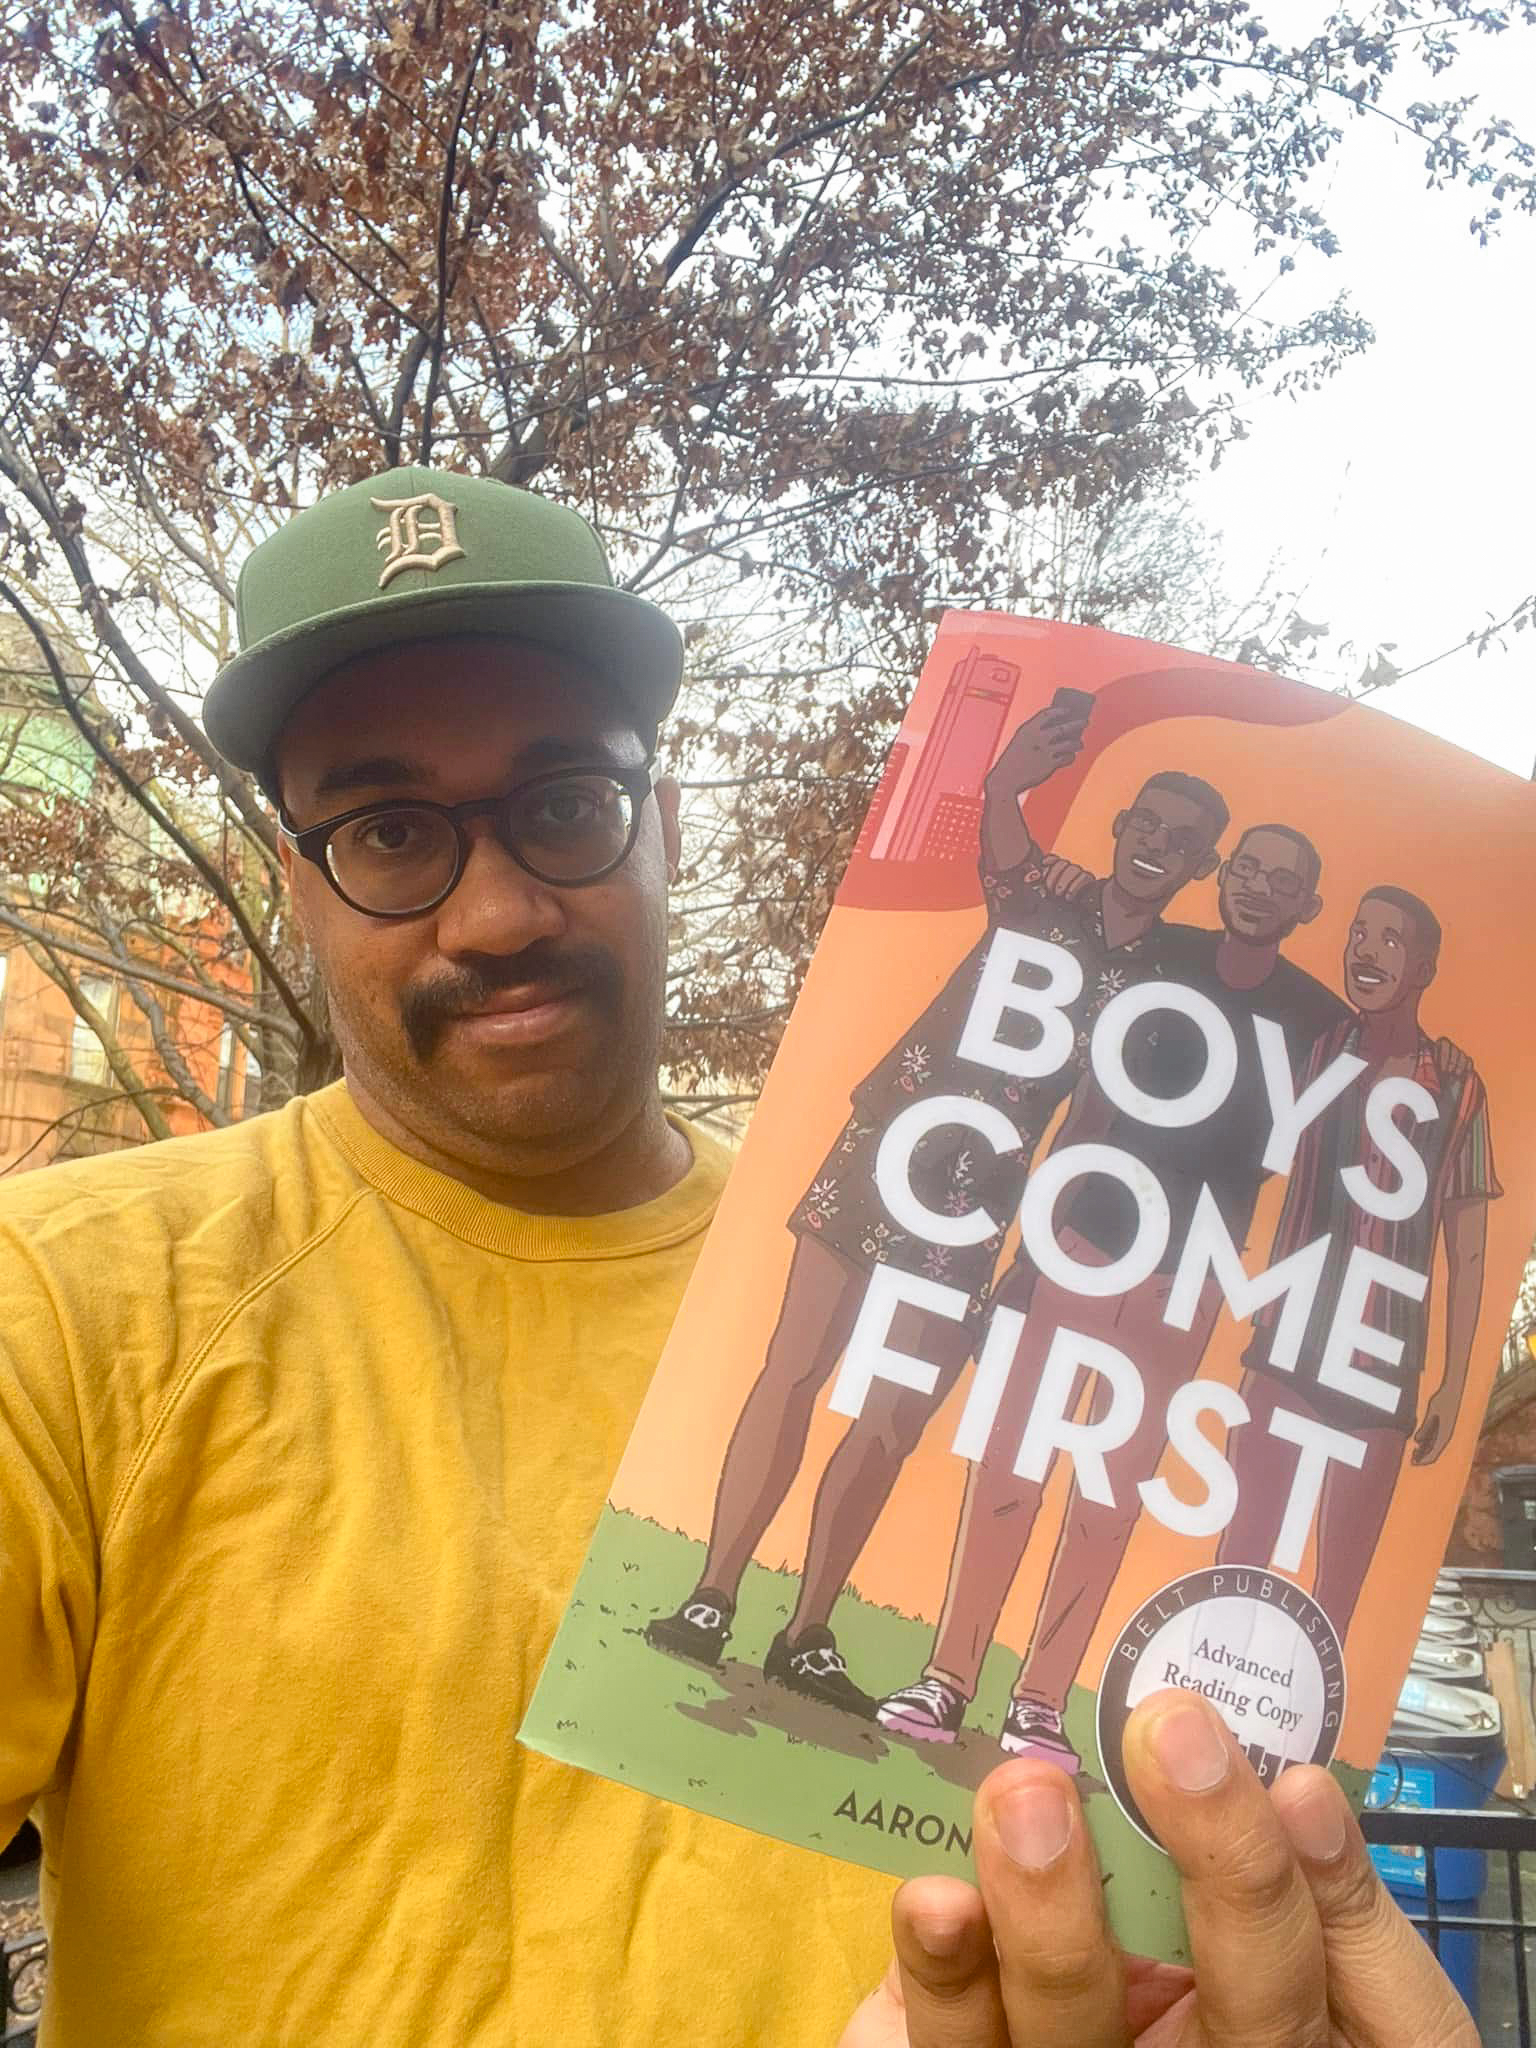 A person of dark skin tone with a mustache, wearing black-rimmed glasses and a green hat. They are wearing a yellow t-shirt and looking at the camera while holding up a book titled 'Boys Come First.' The book has an illustrated cover with three dark skin people smiling and embracing.